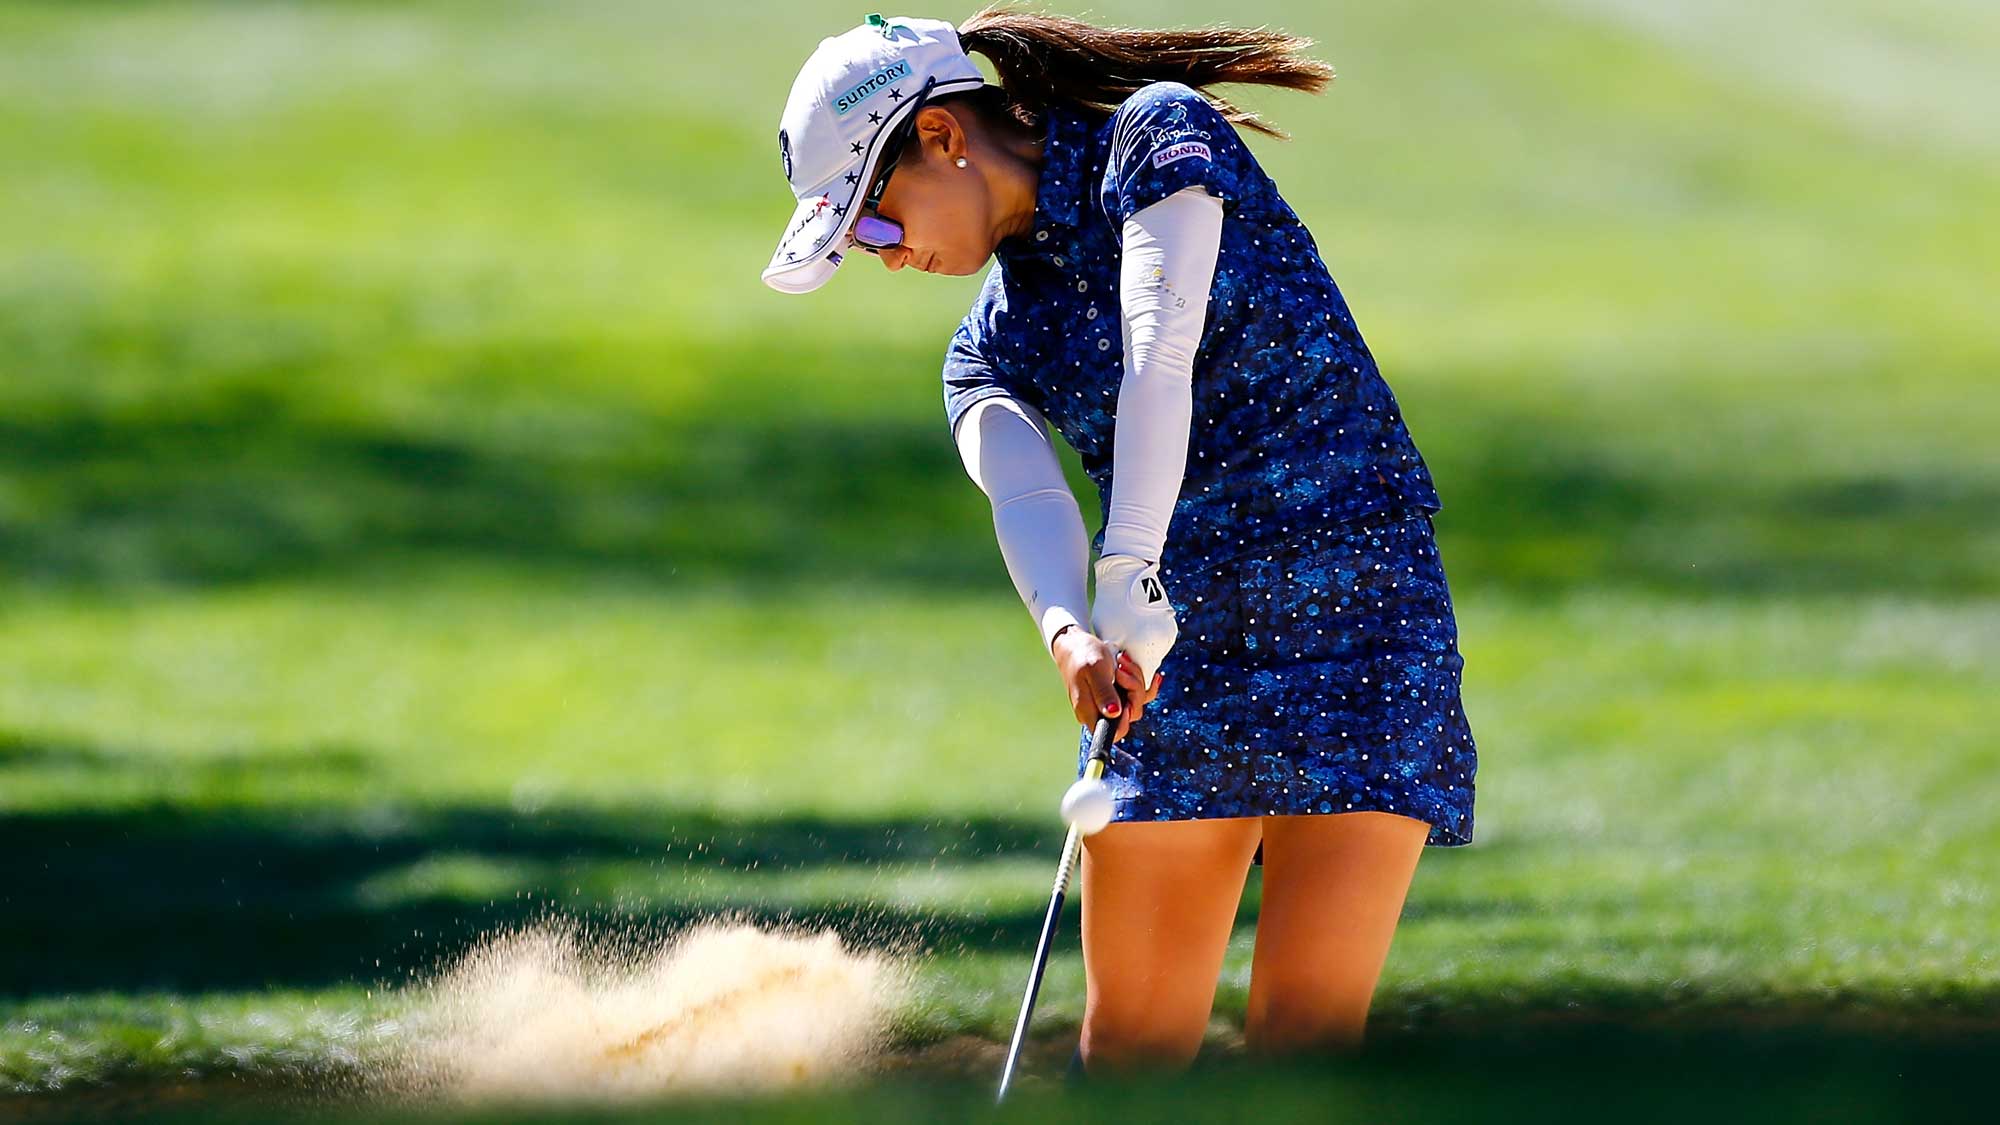 Ai Miyazato of Japan hits out of a bunker on the 9th hole during the third round of the LPGA Cambia Portland Classic